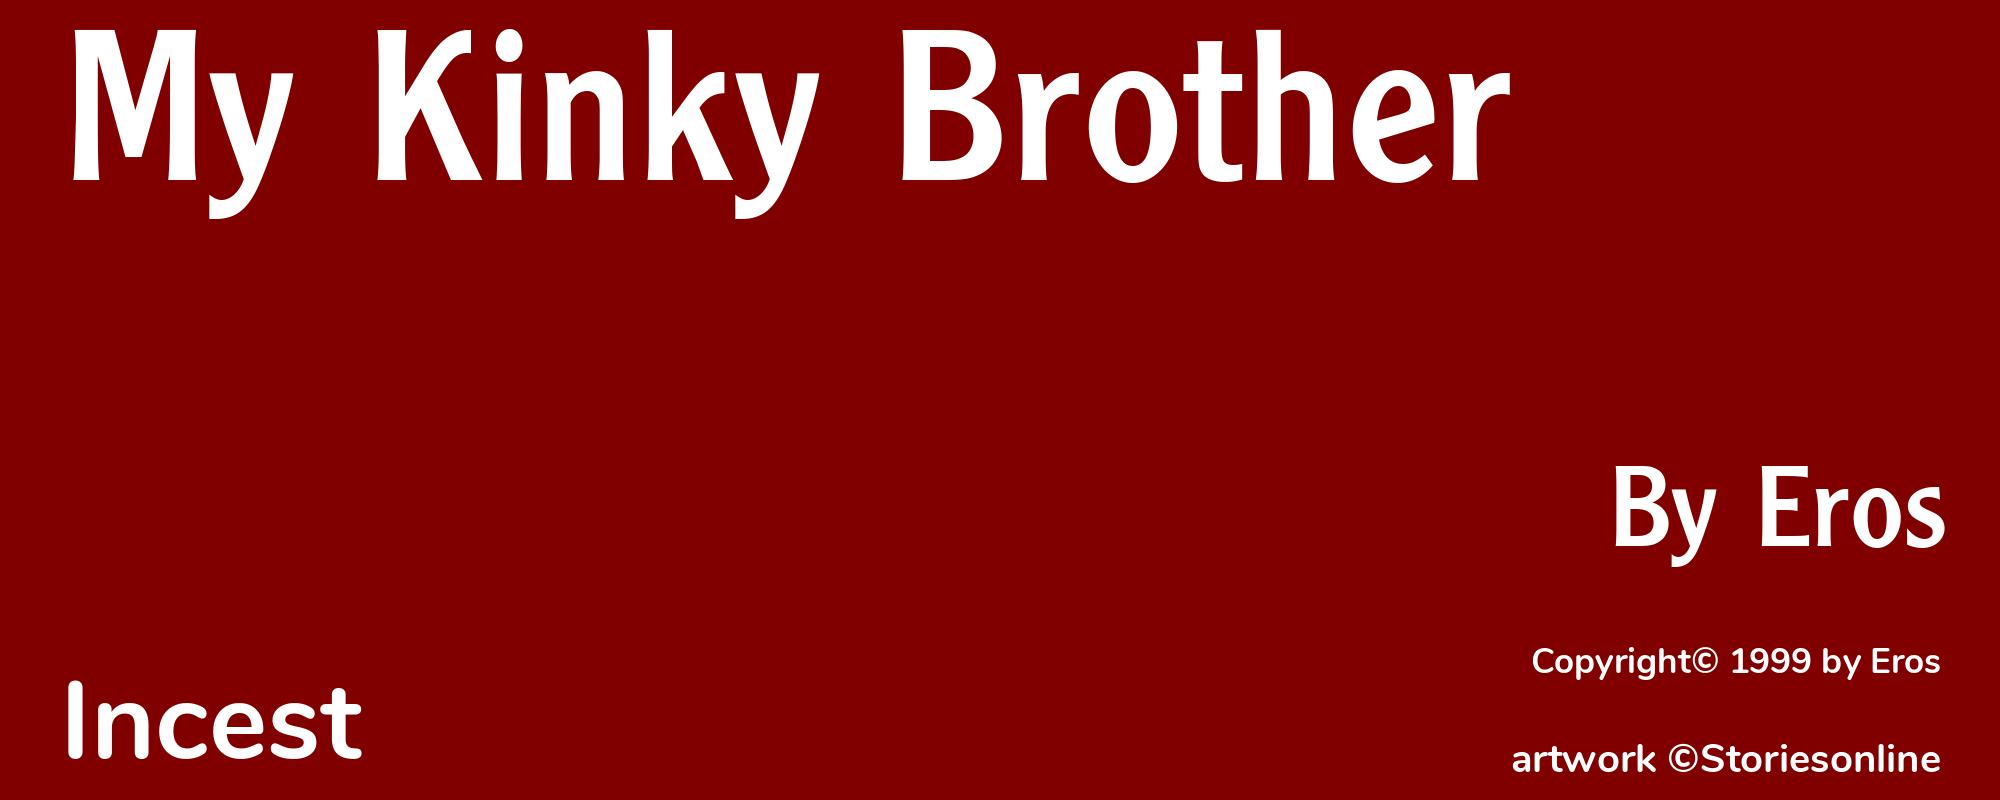 My Kinky Brother - Cover